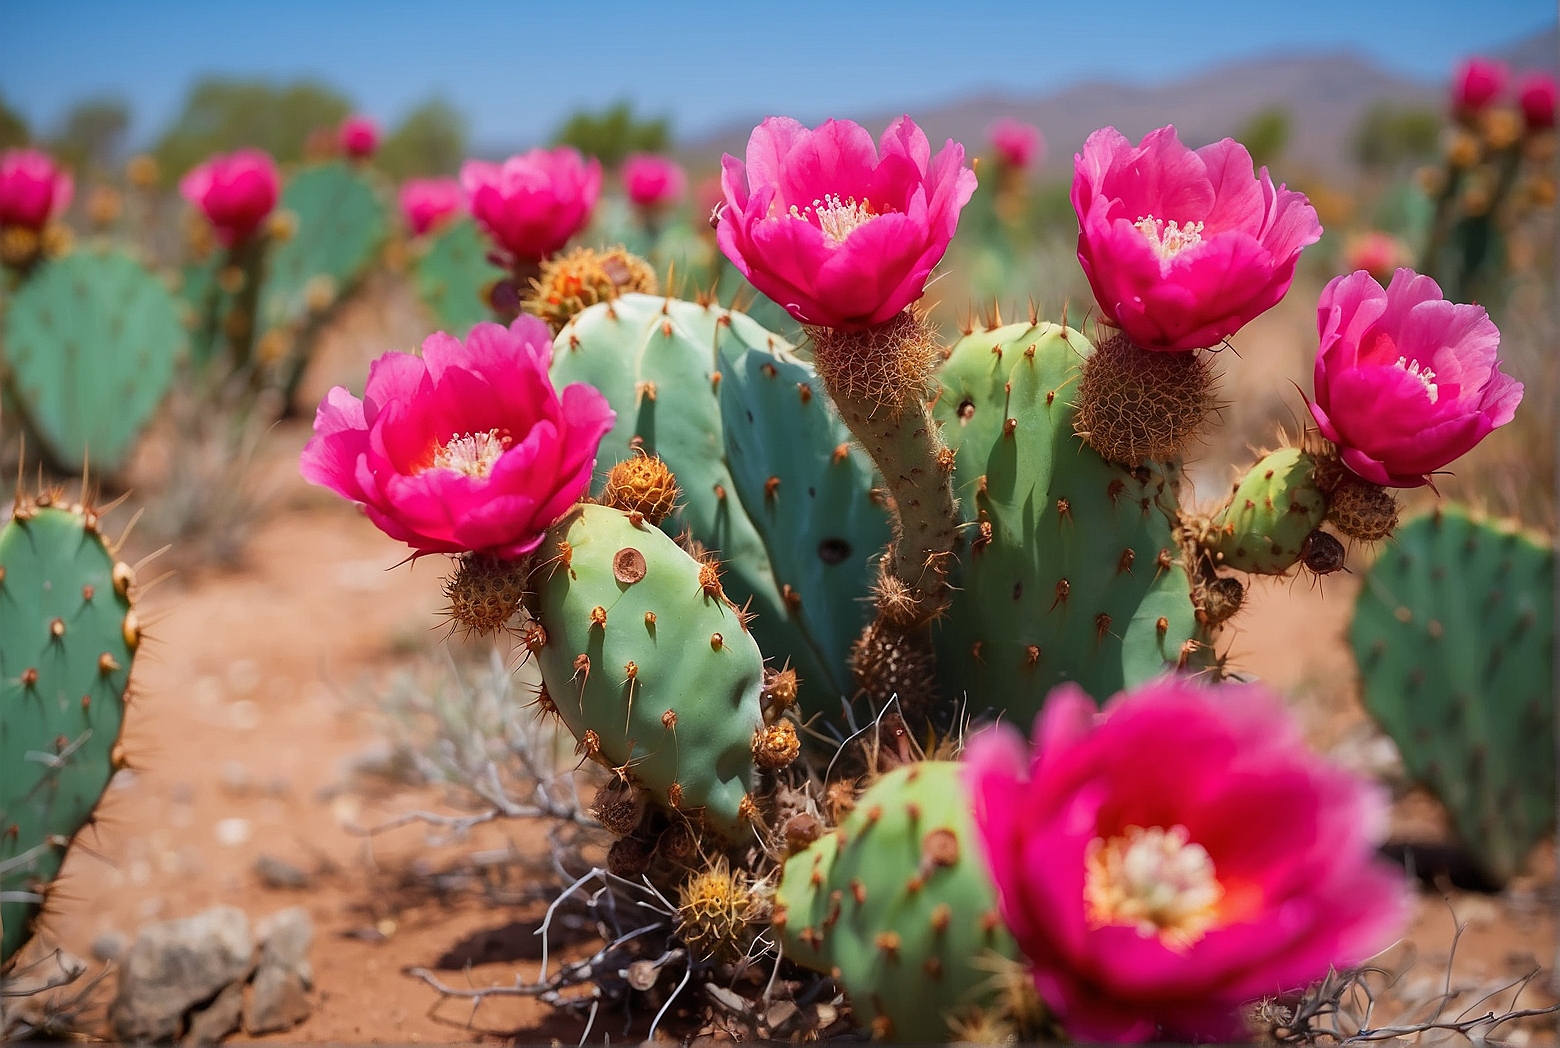 The Growth Rate of Prickly Pear Cactus